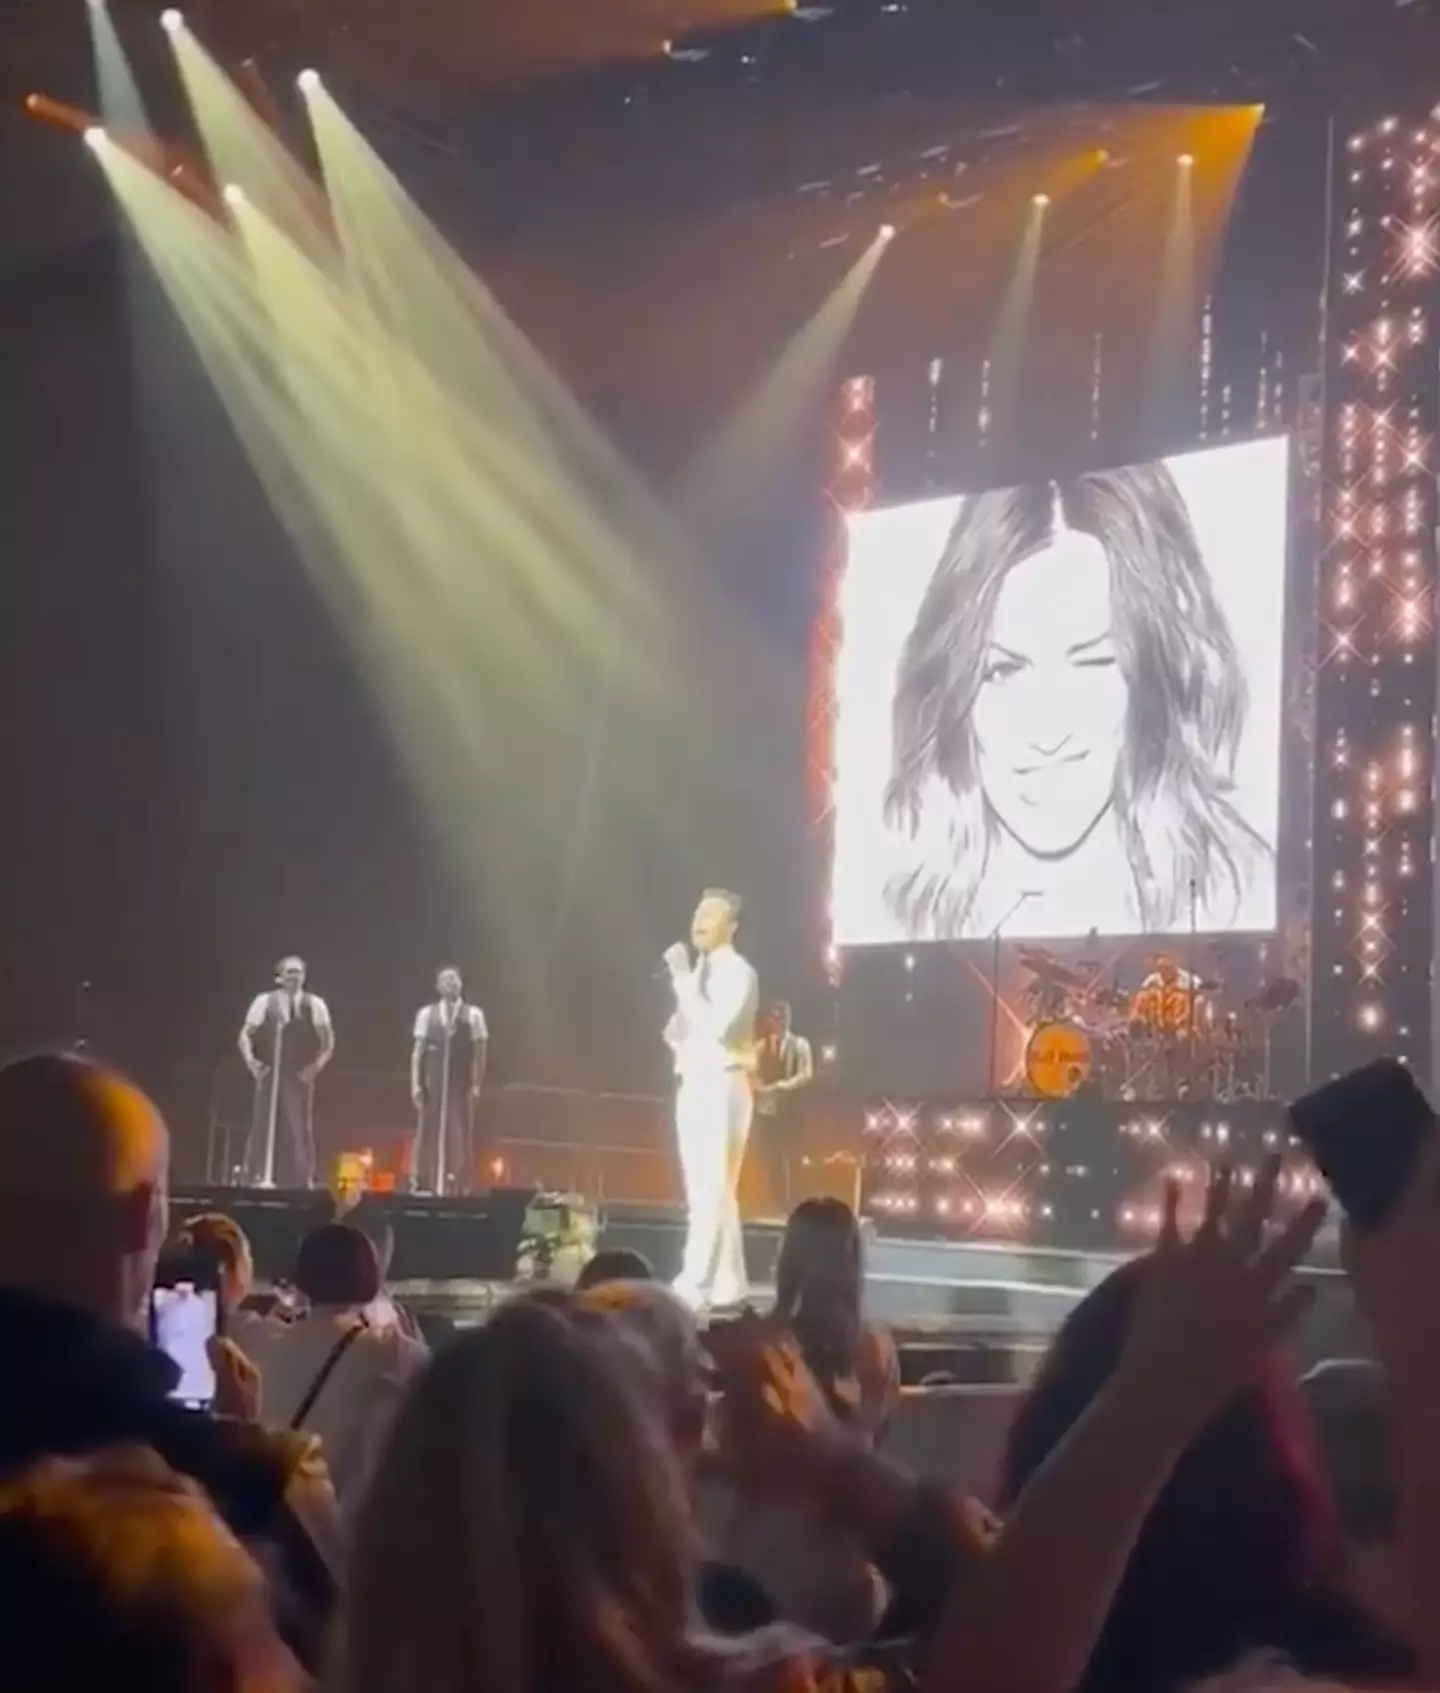 The singer dedicated a song to his late friend during his concert over the weekend.